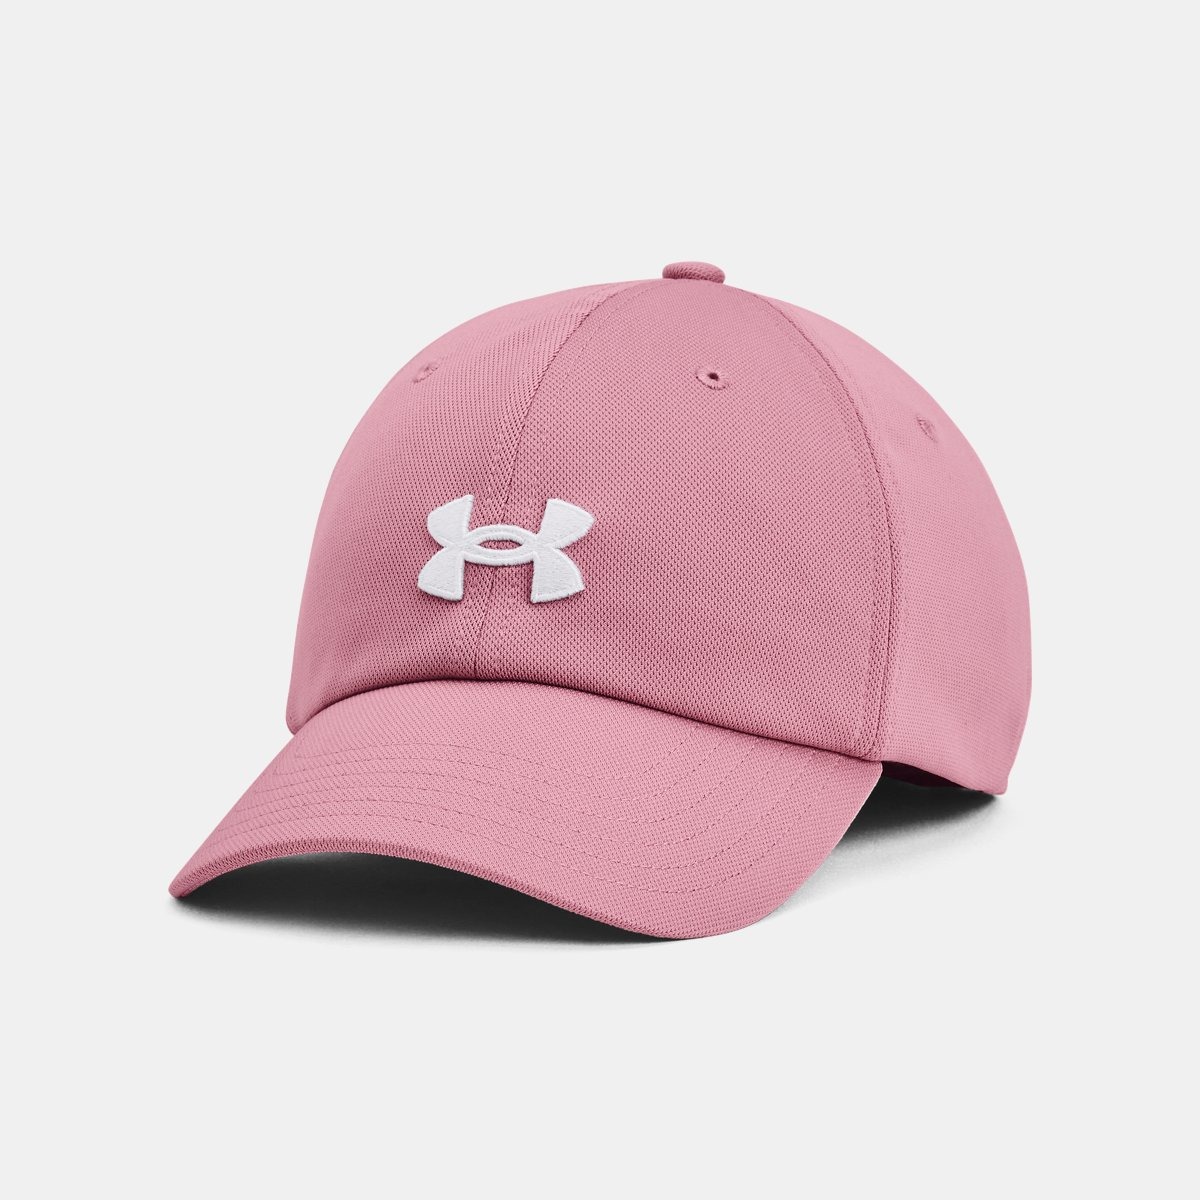 Ladies Cap in Pink from Under Armour GOOFASH